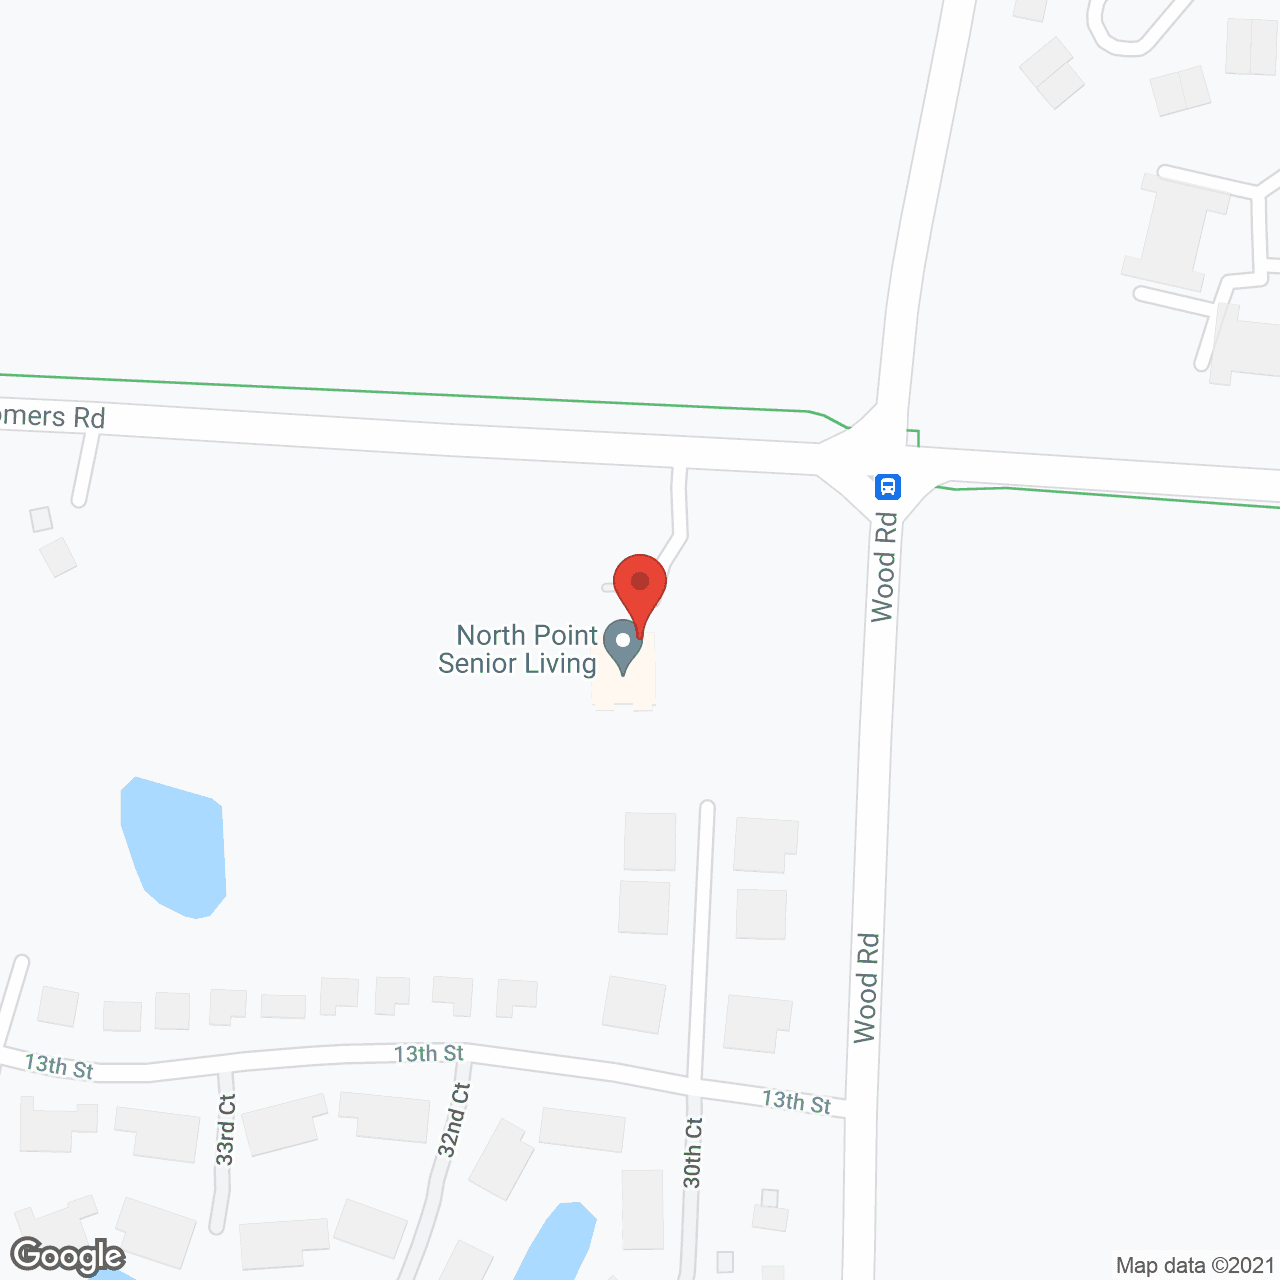 North Point Senior Living in google map